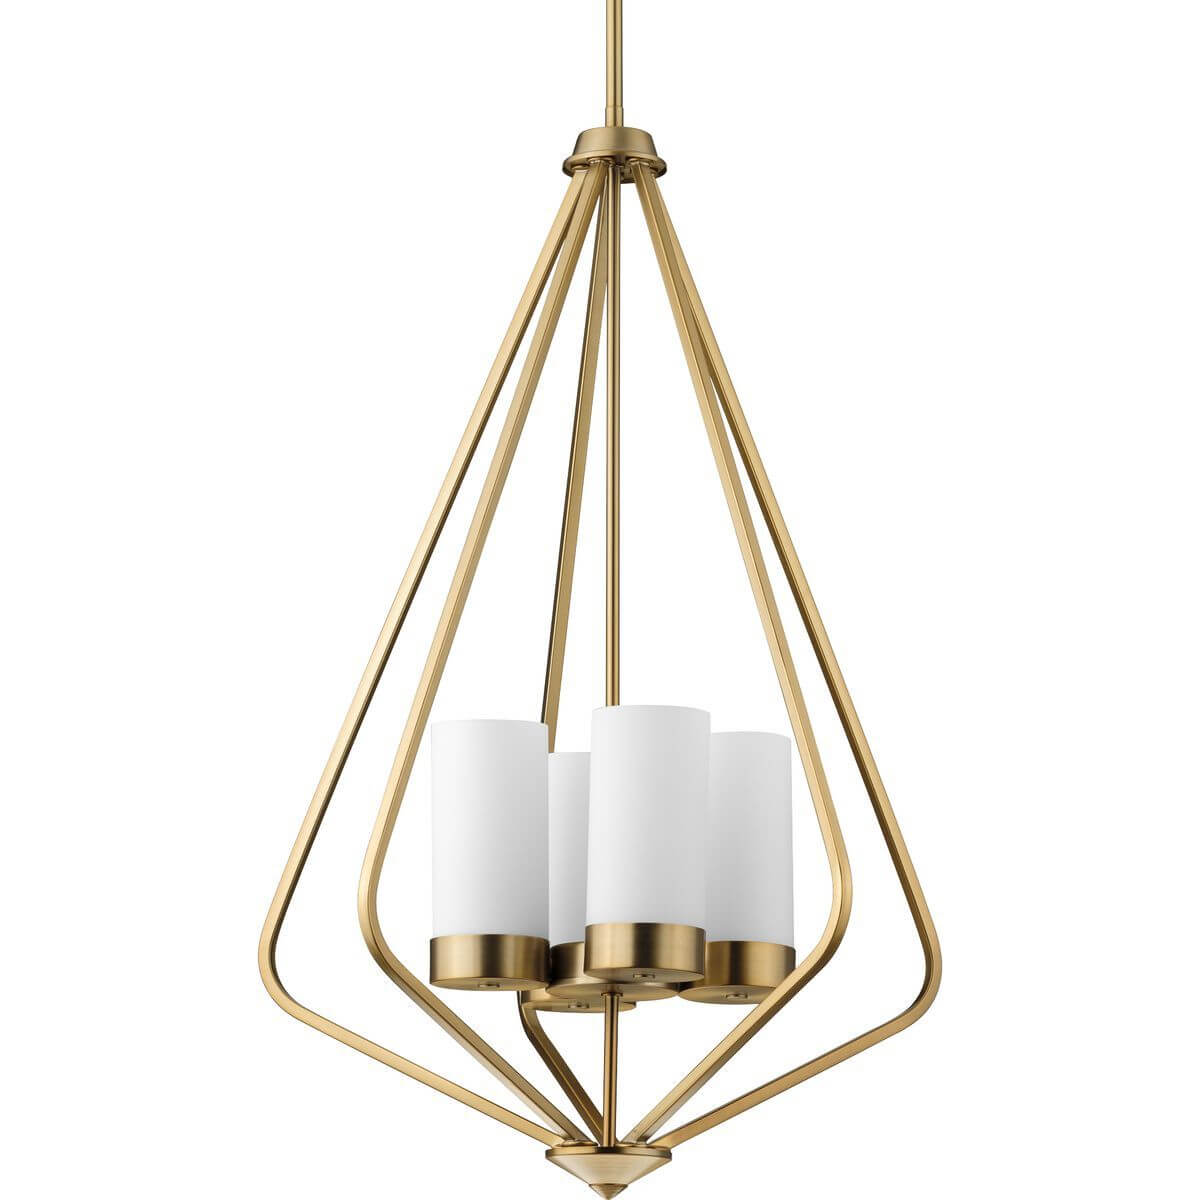 Progress Lighting Elevate 4 Light 20 inch Foyer Pendant in Brushed Bronze with Etched Painted White Inside Glass P500305-109